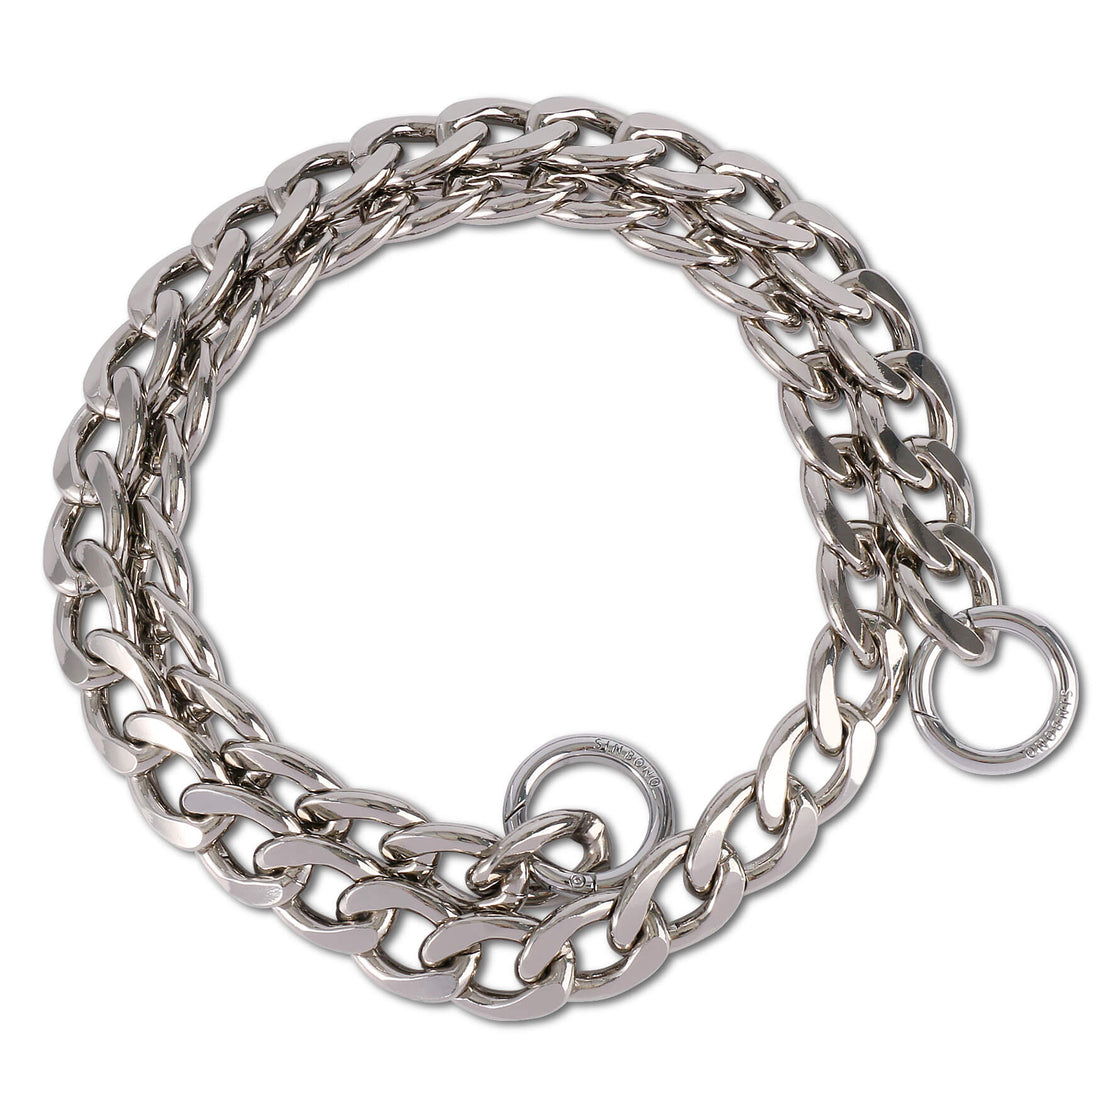 Chunky Chain Strap Silver - Luxury Chain Strap For SINBONO Bag